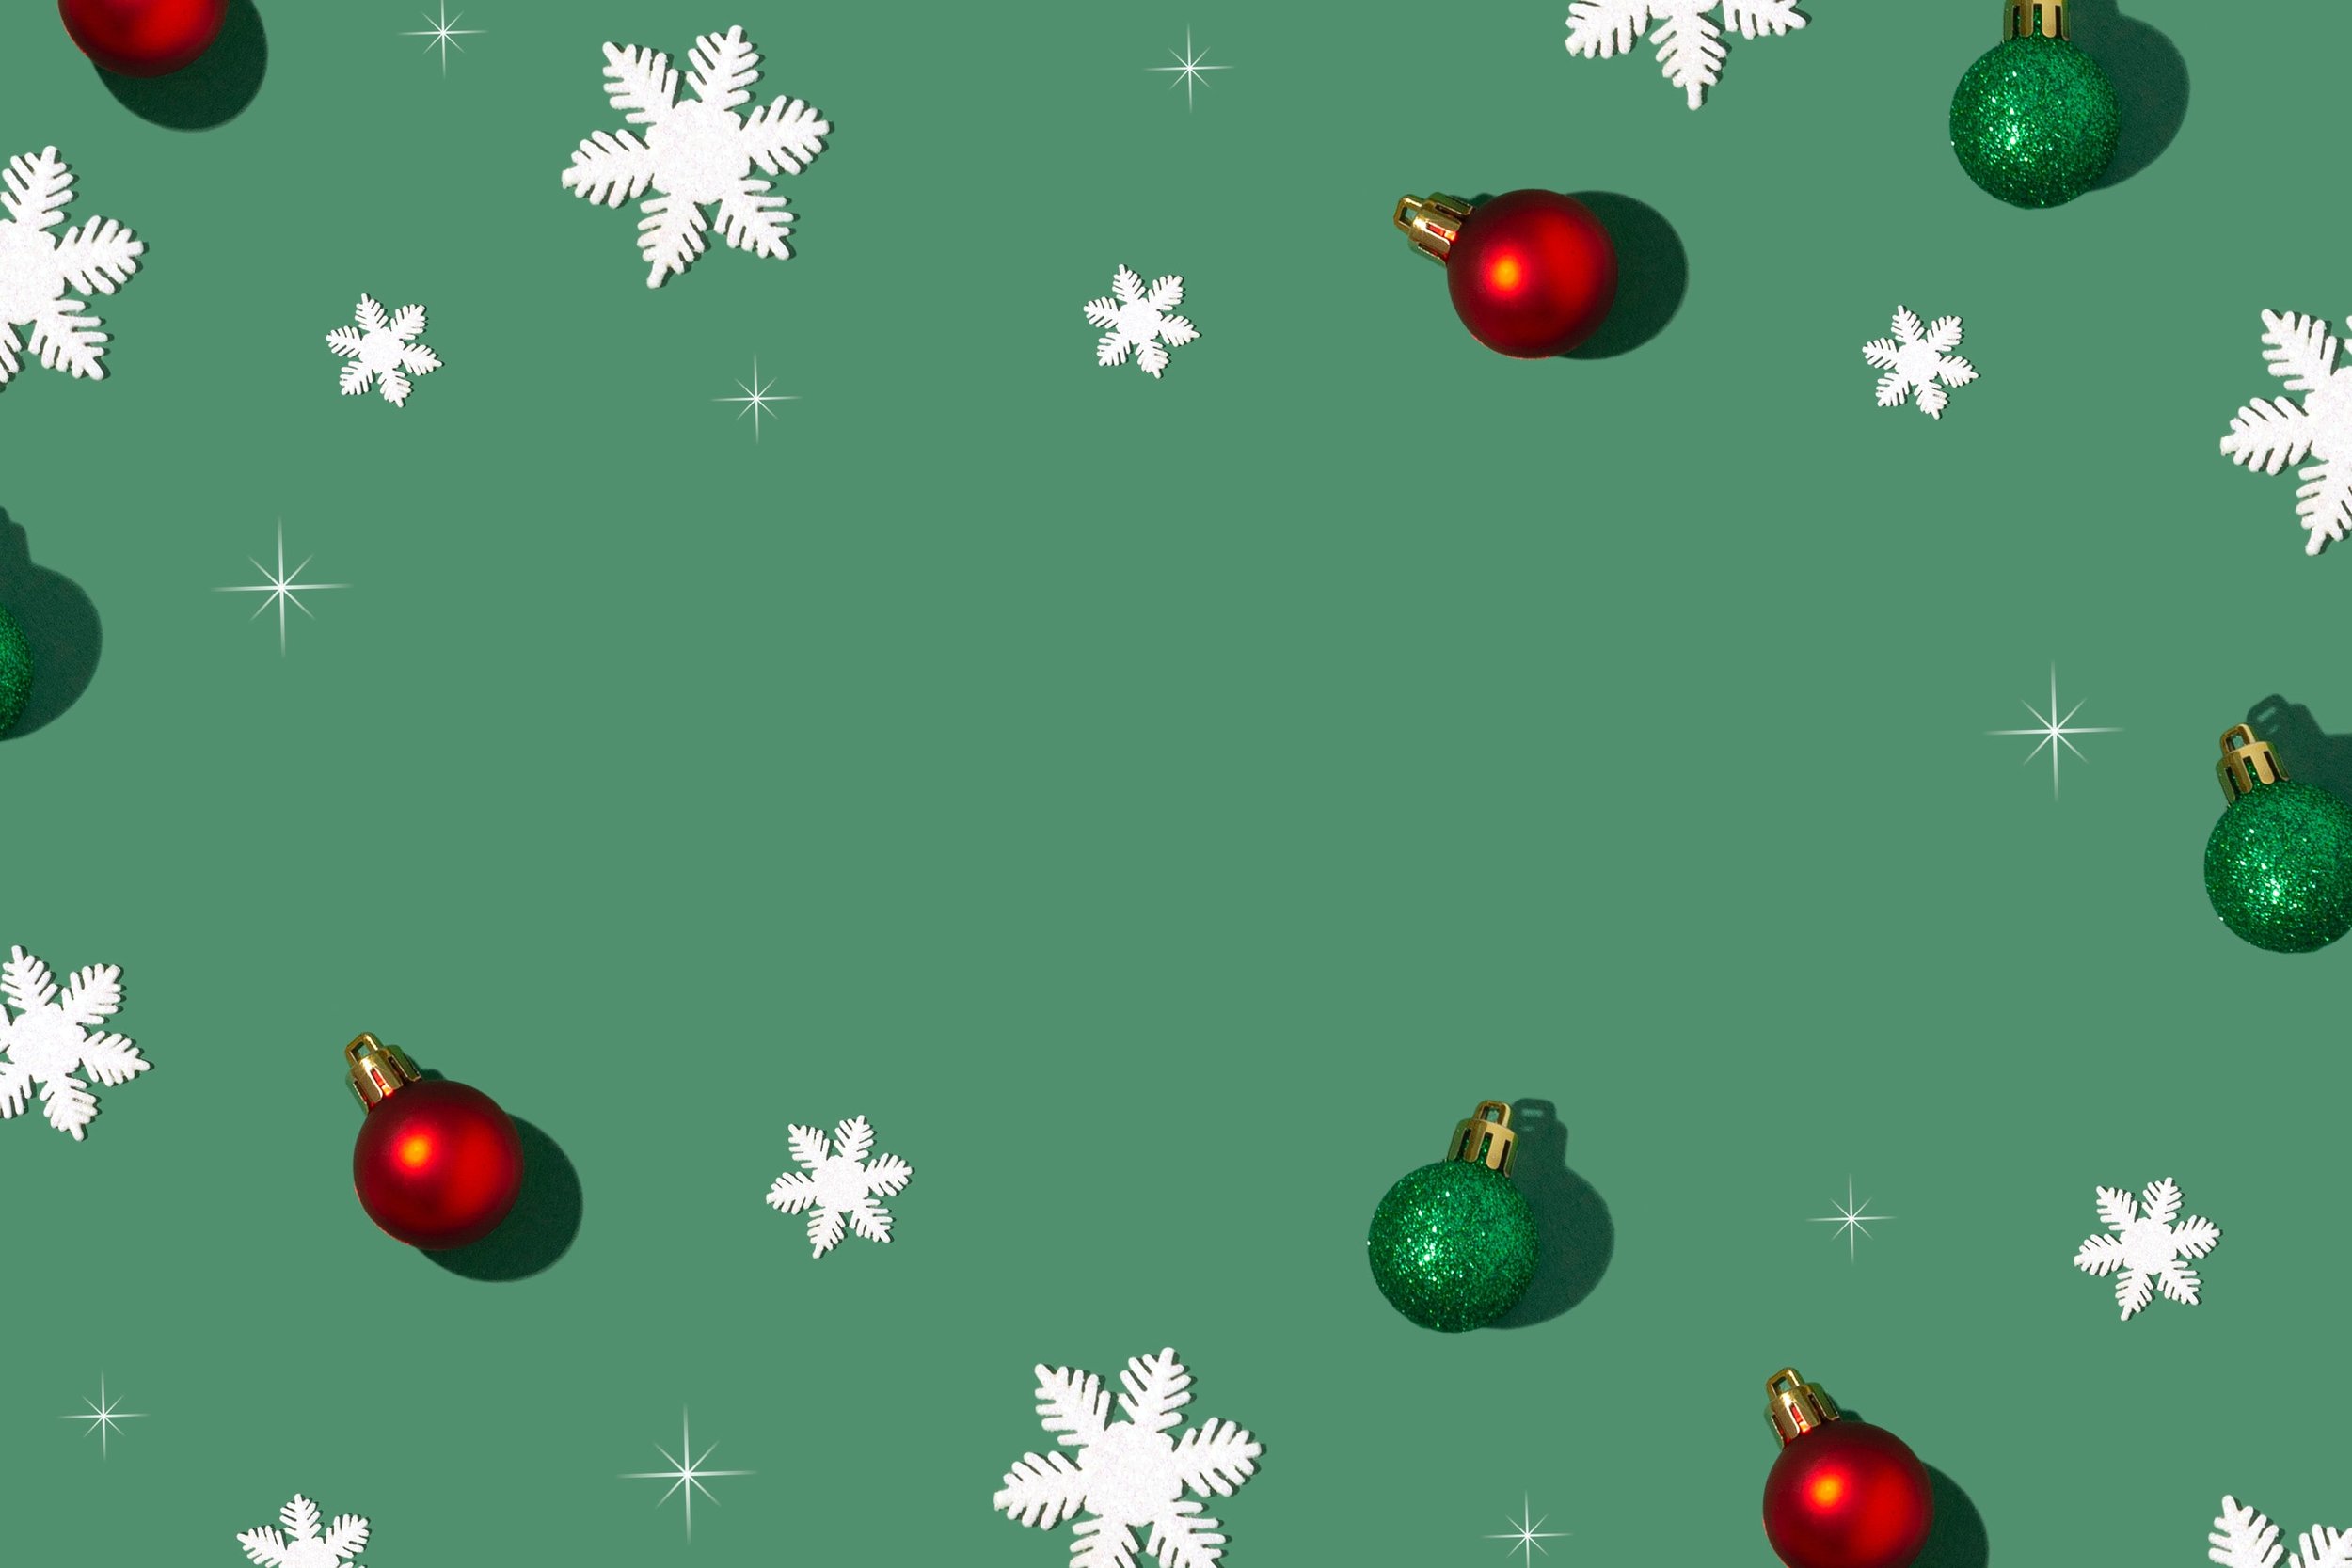 Pep up your holiday festivities with these virtual holiday games